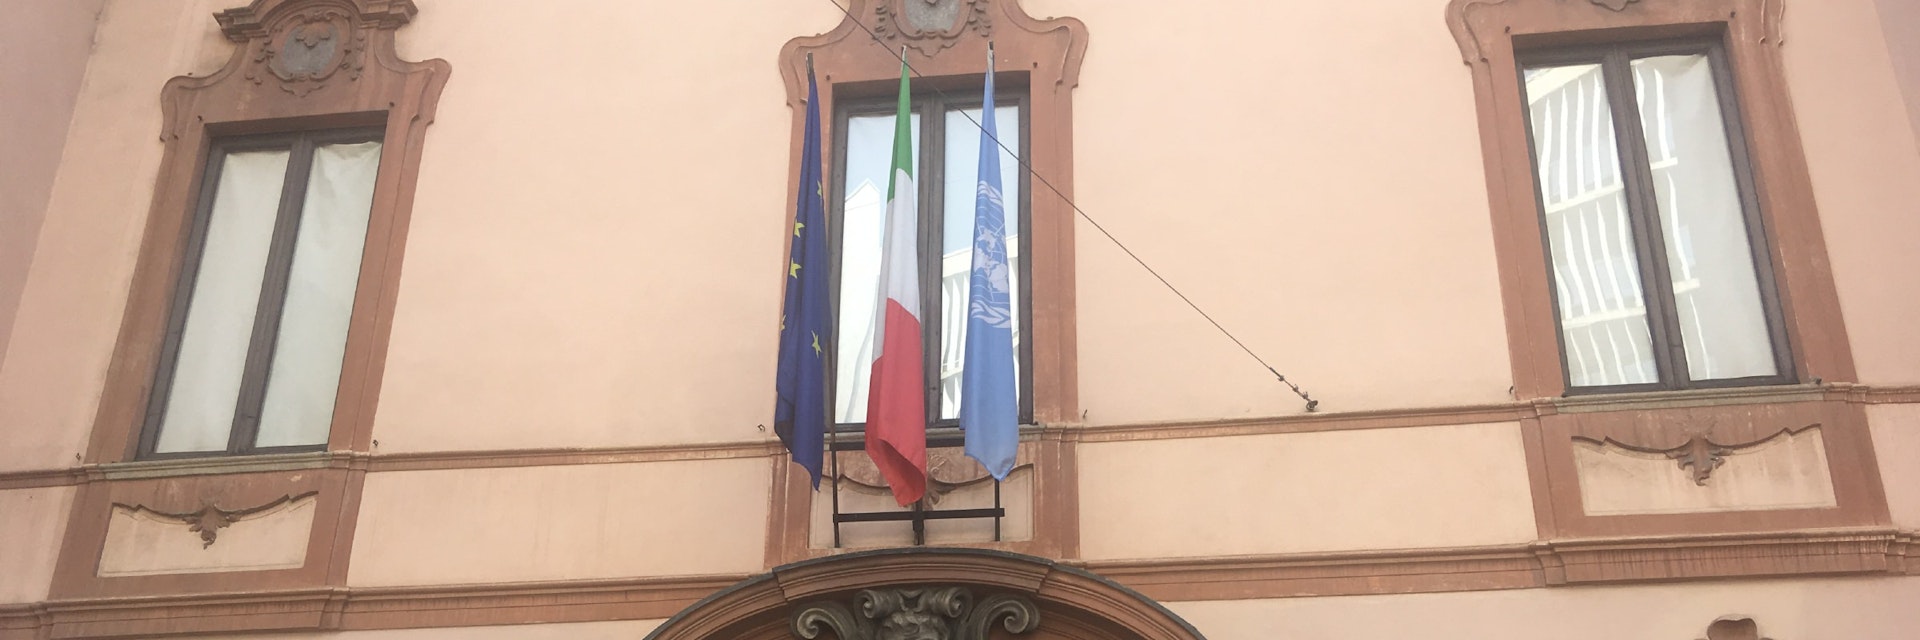 Entrance to Palazzo Clerici